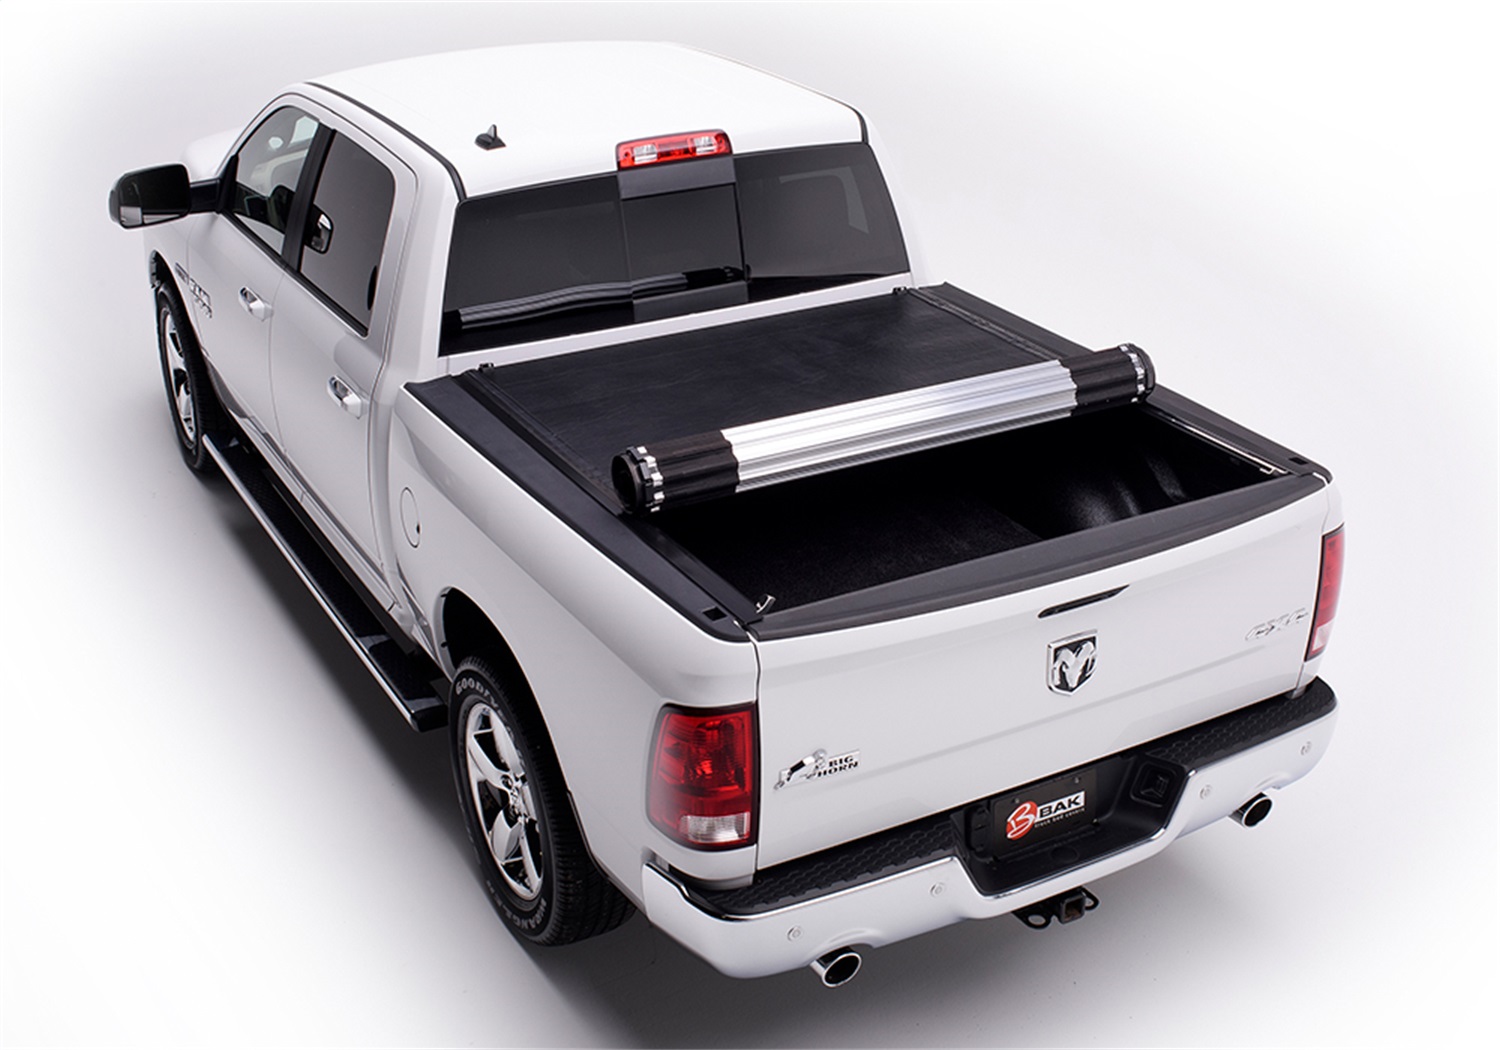 BAK Industries 39213 Revolver X2 Hard Rolling Truck Bed Cover